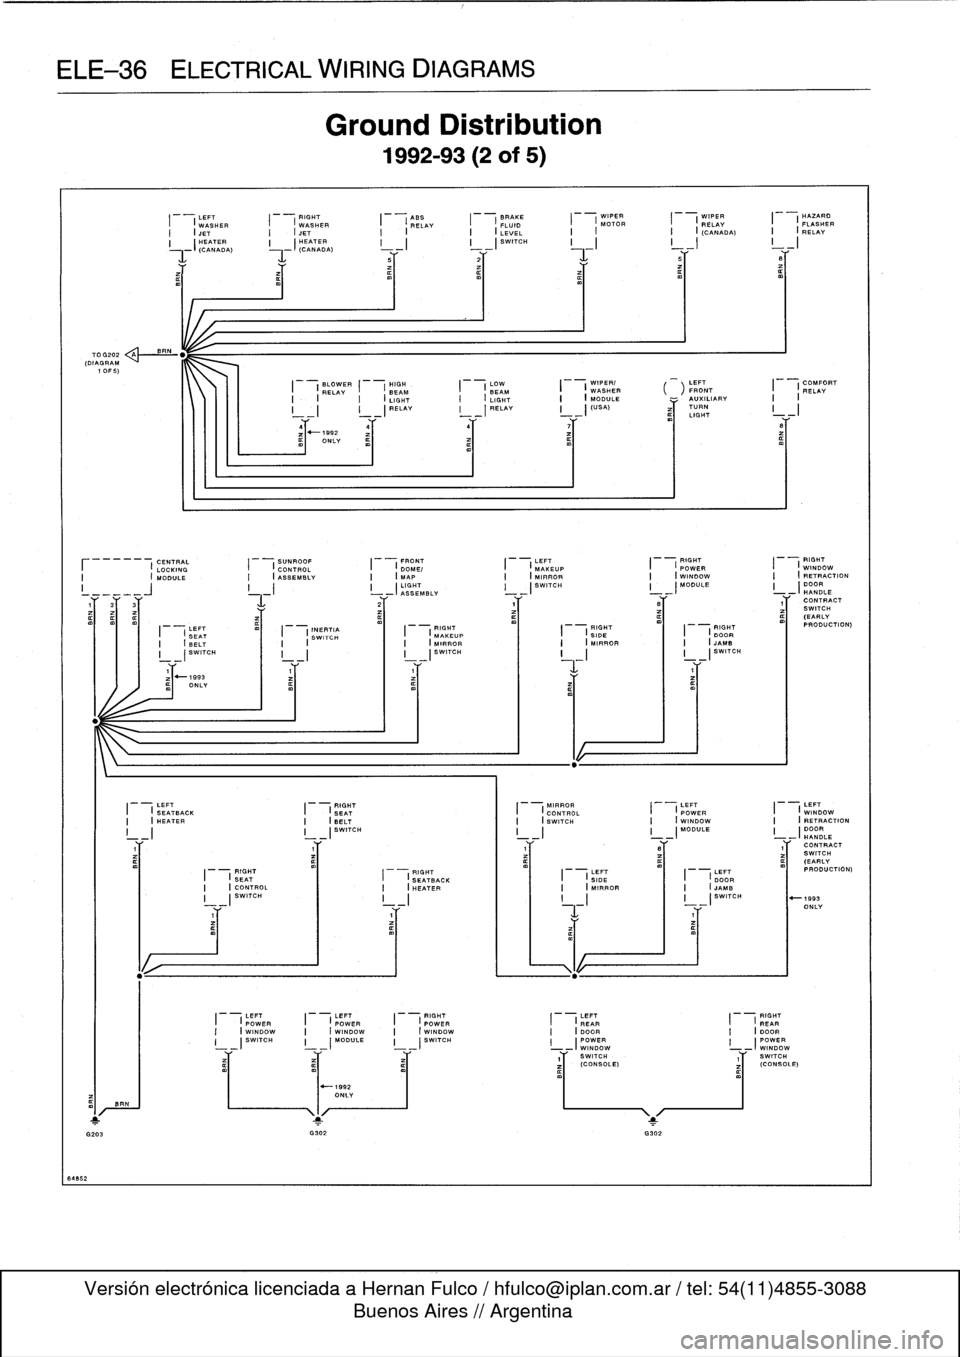 BMW 318i 1997 E36 User Guide 
ELE-36
ELECTRICAL
WIRING
DIAGRAMS

64852

70G202
(DIAGRAM
1
OF
5)

BR

BRN

LEFT

	

RIGHT

	

ASS

	

BRAKE

	

WIPER

	

WIPER

	

HAZARD
I

	

(
WASHER

	

I

	

(
WASHER

	

I

	

(
RELAY

	

I

